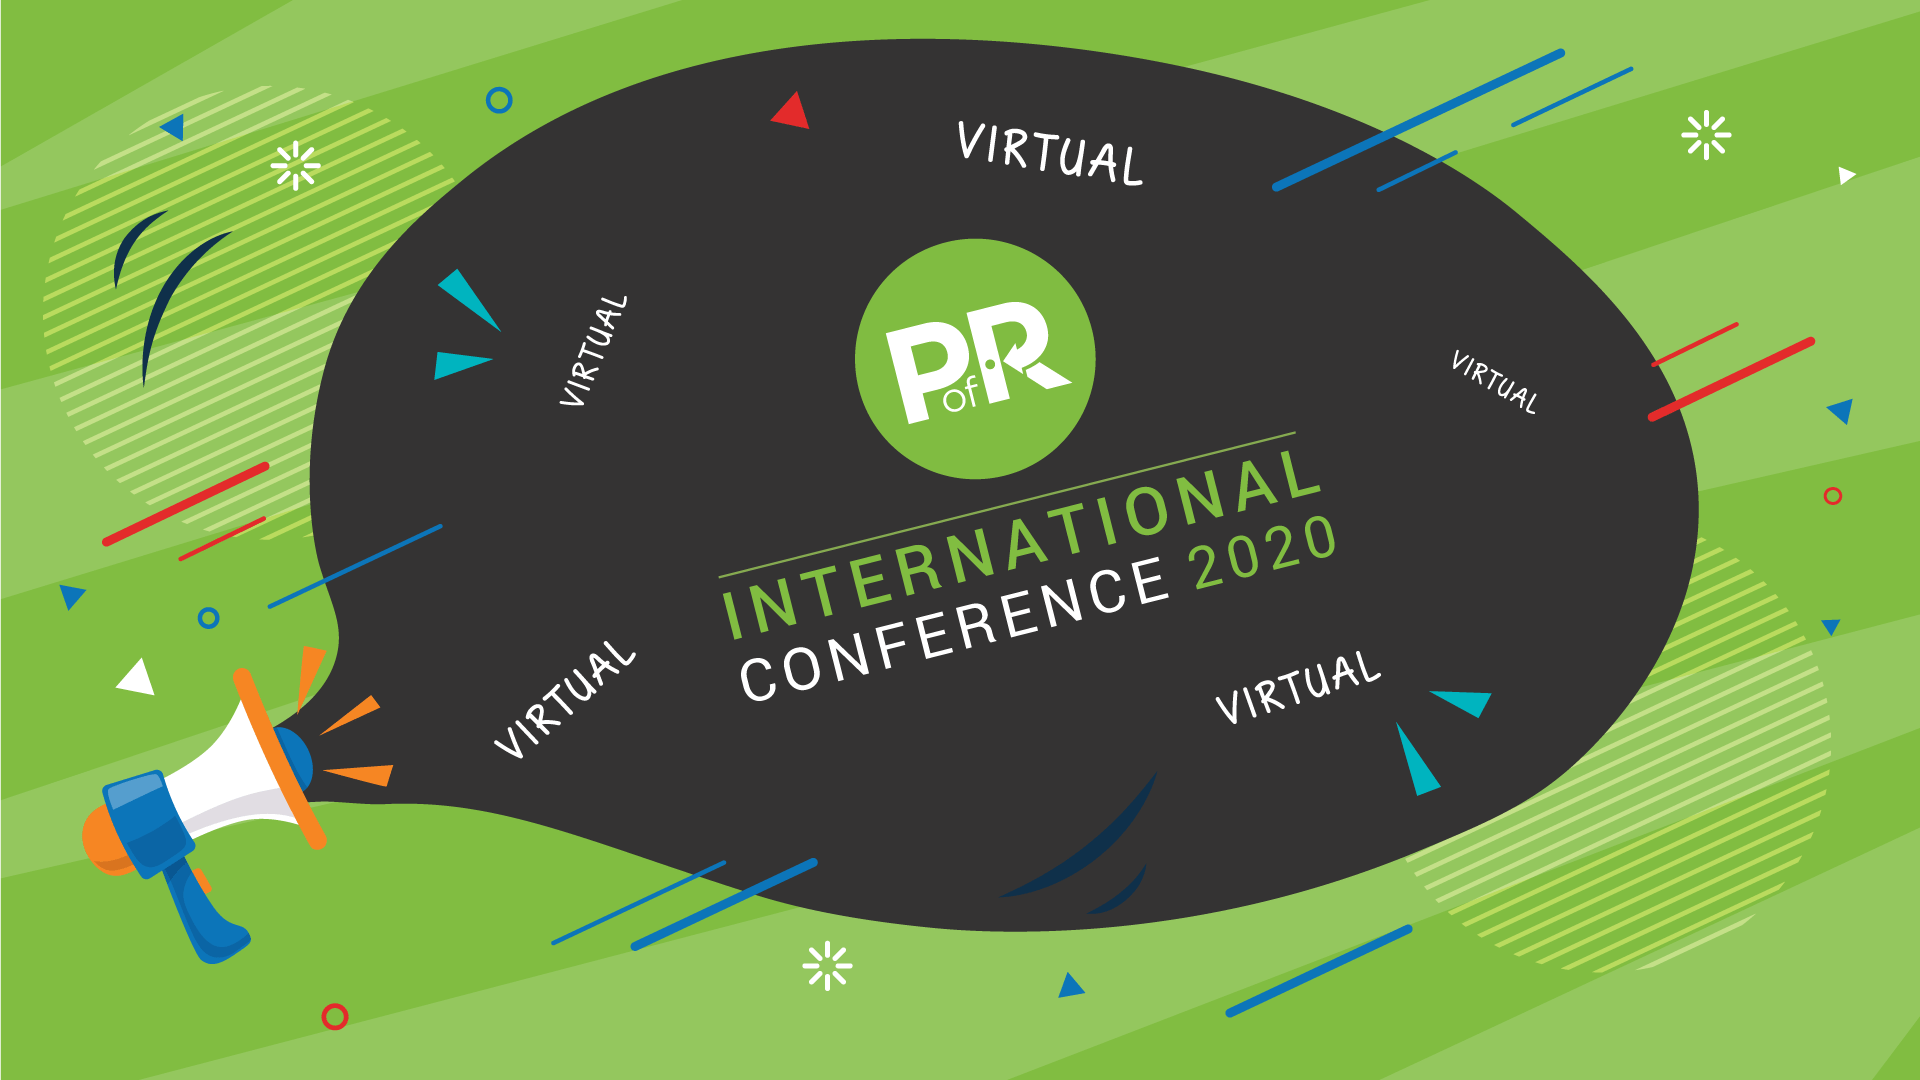 2020 International Conference Goes Virtual megaphone graphic